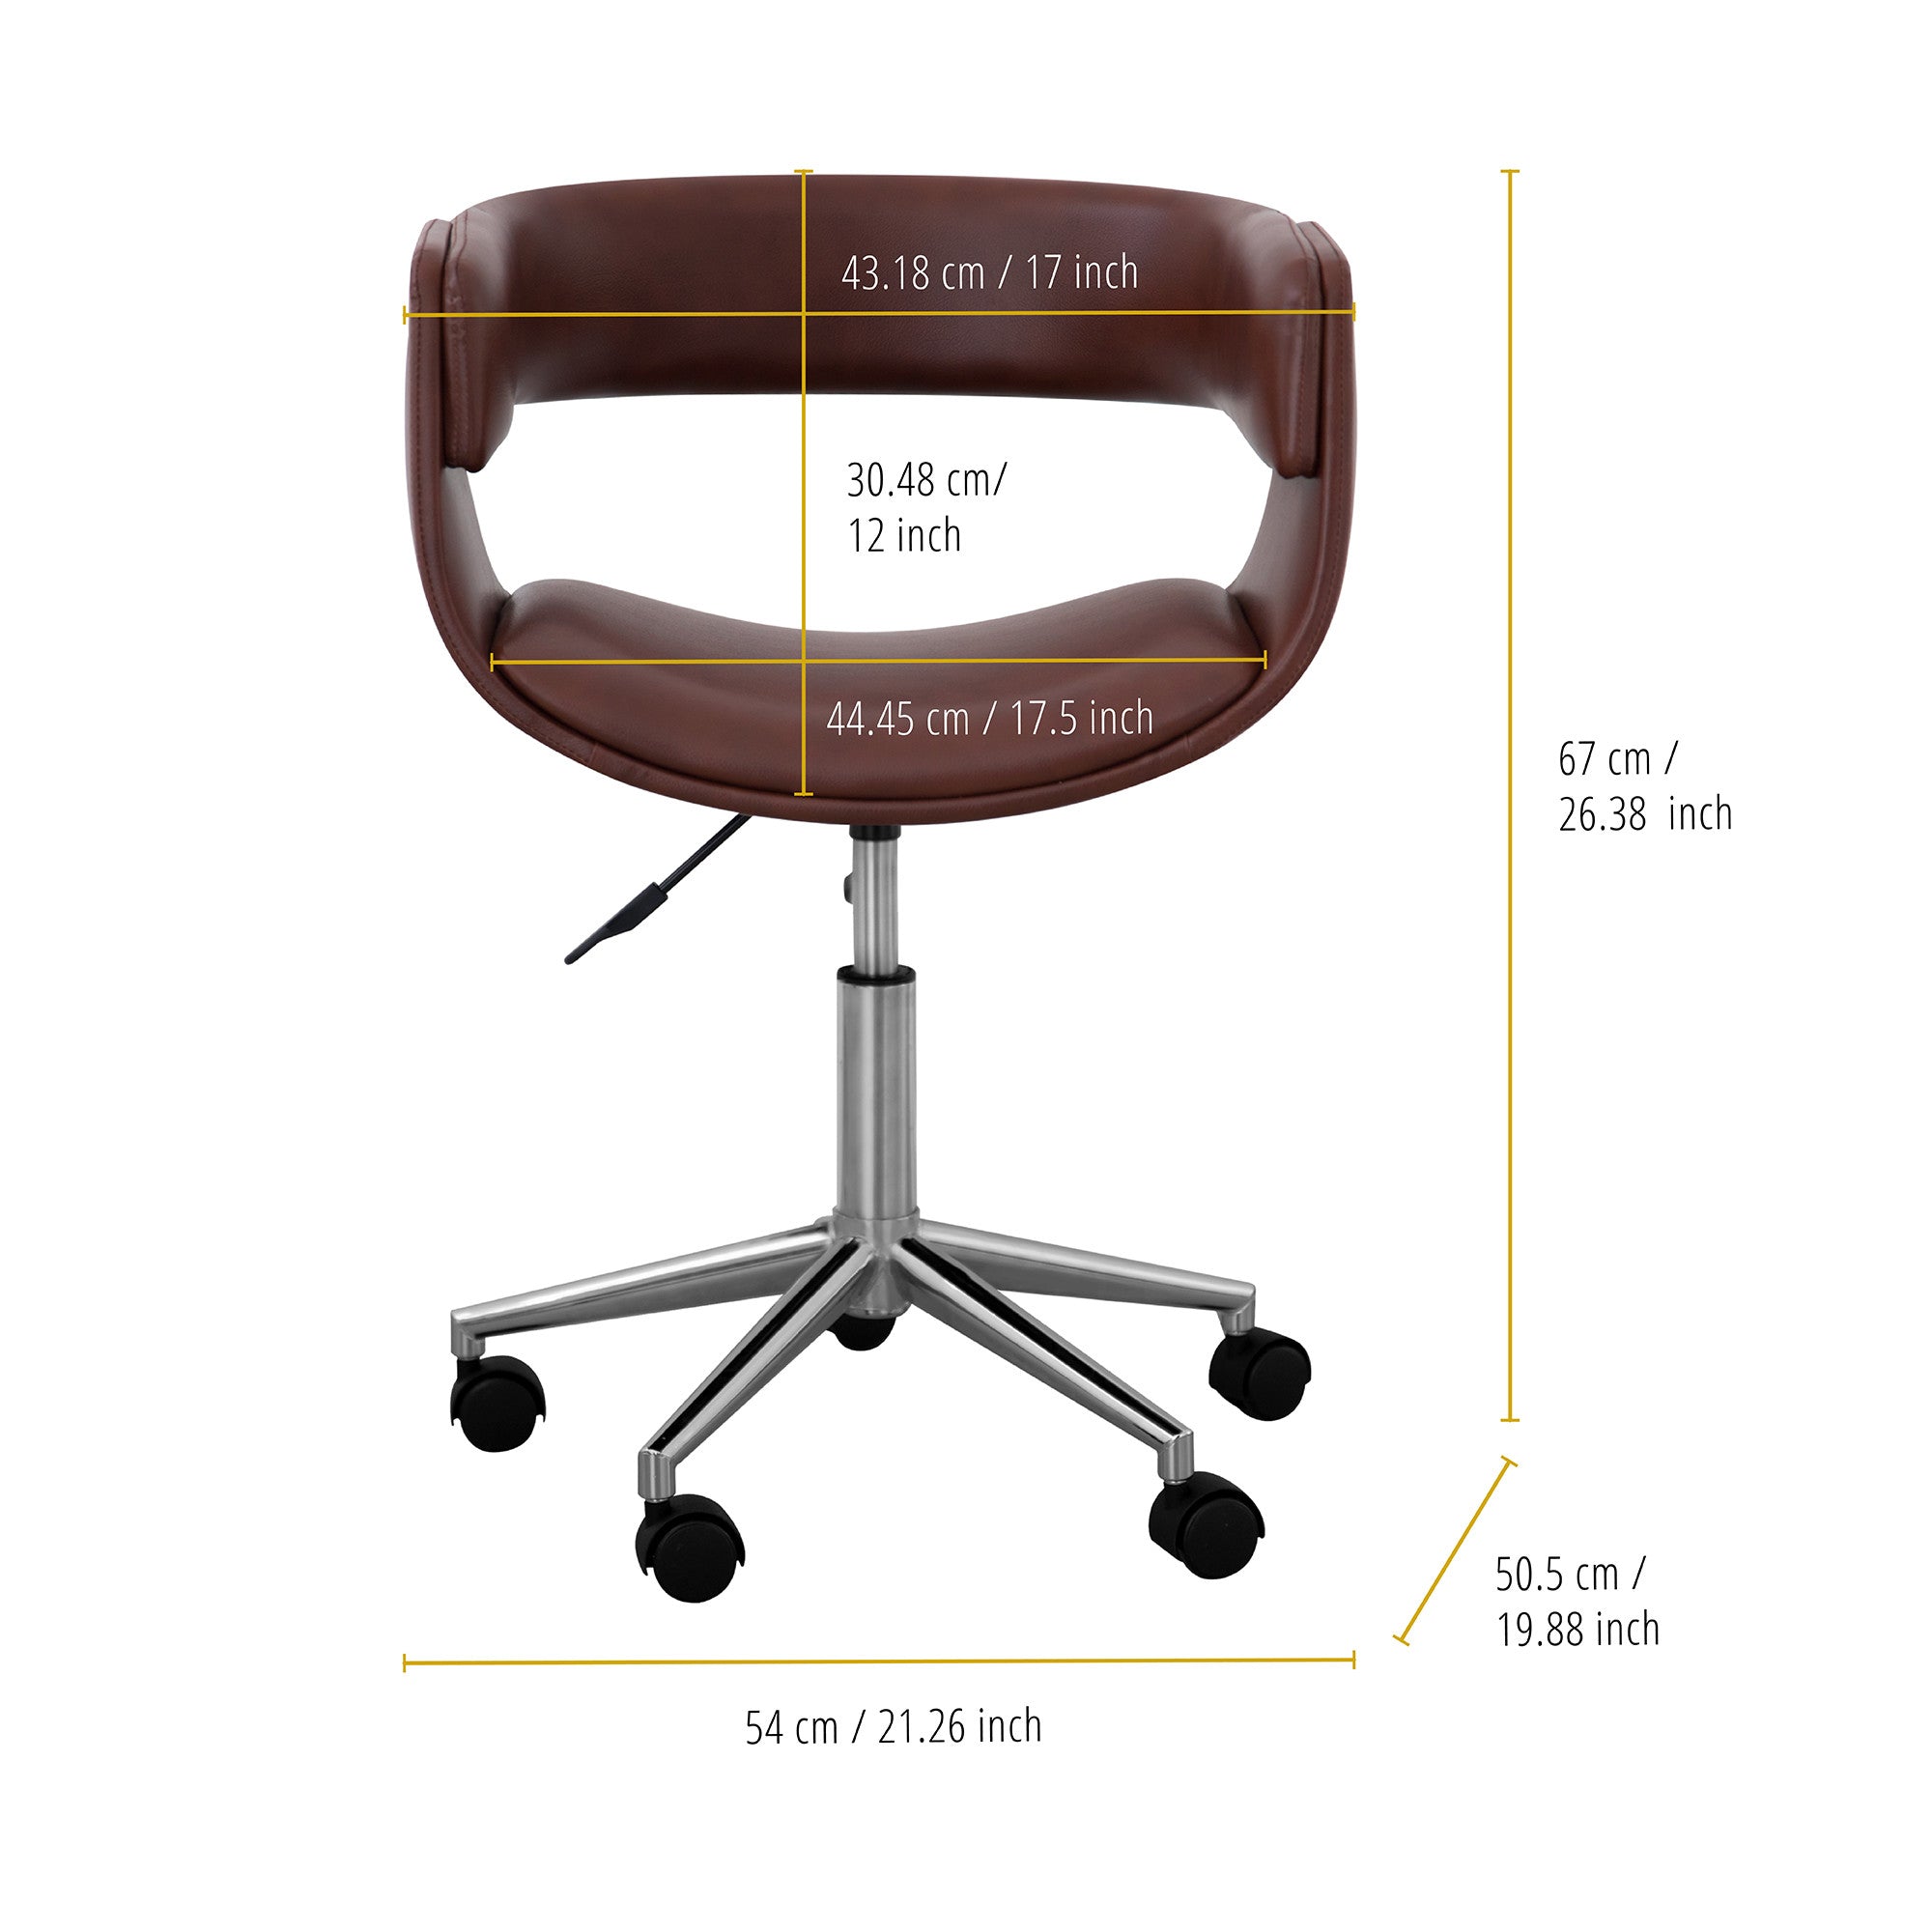 Teamson Home Modern PU Leather Office Chair with Adjustable Ergonomic Seat, Swivel Base, Brown/Chrome